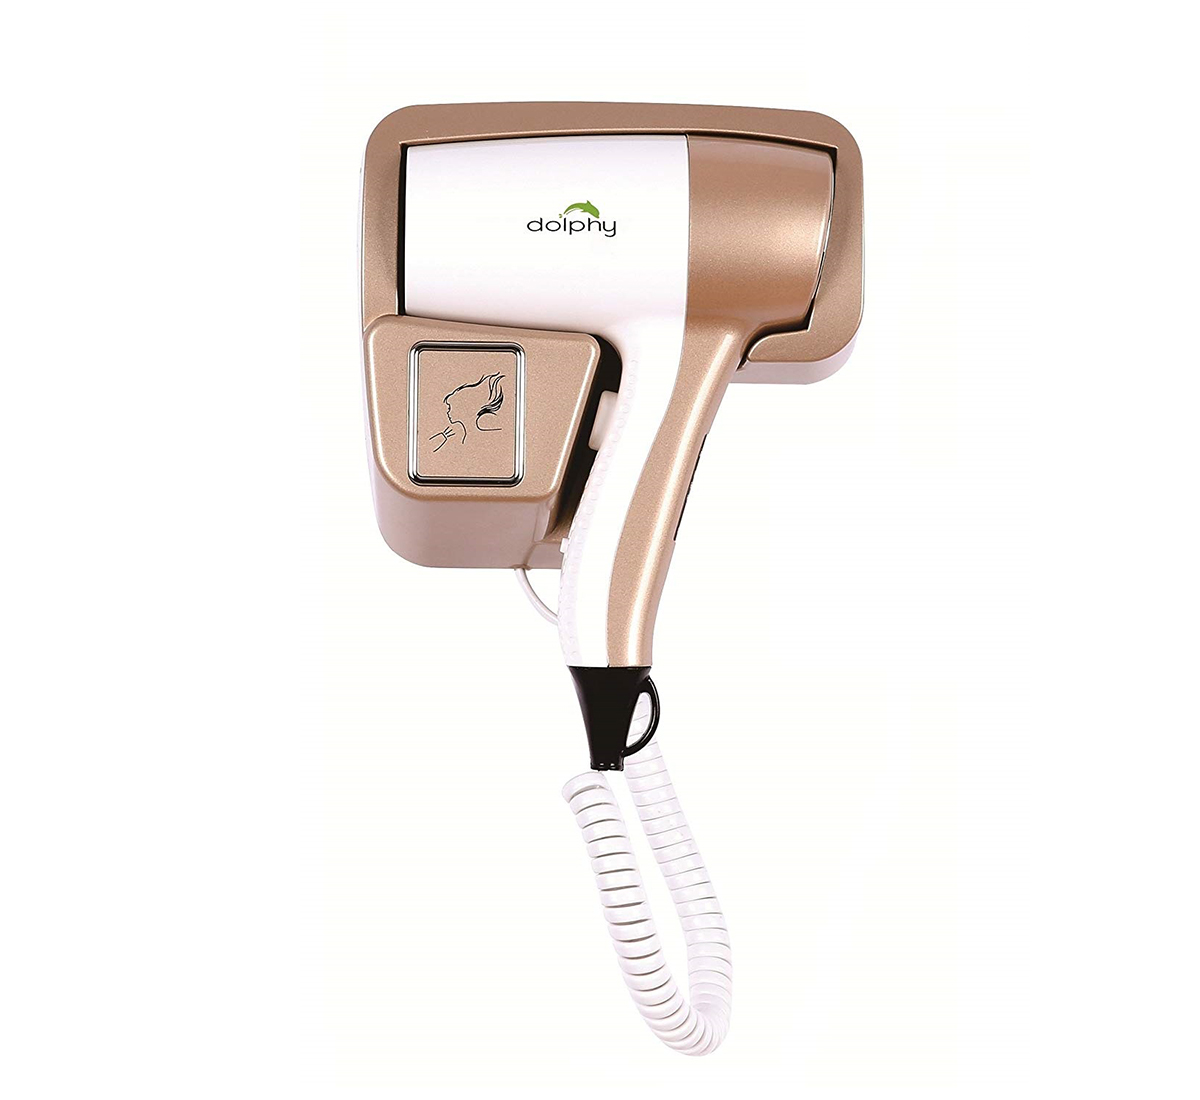 Gold and white hair dryer with 1200w